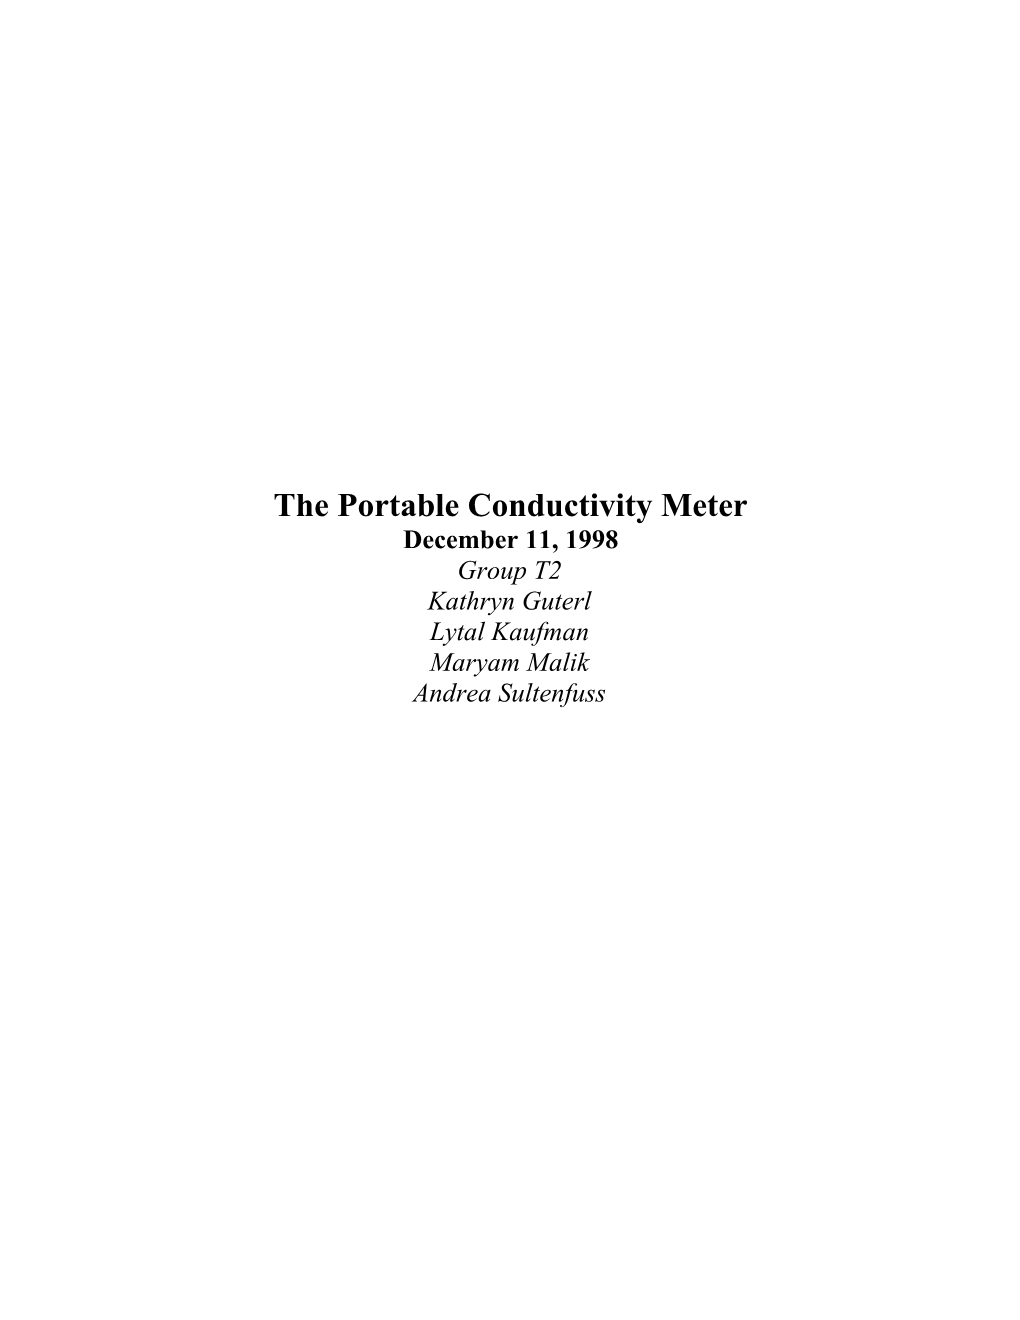 The Portable Conductivity Meter